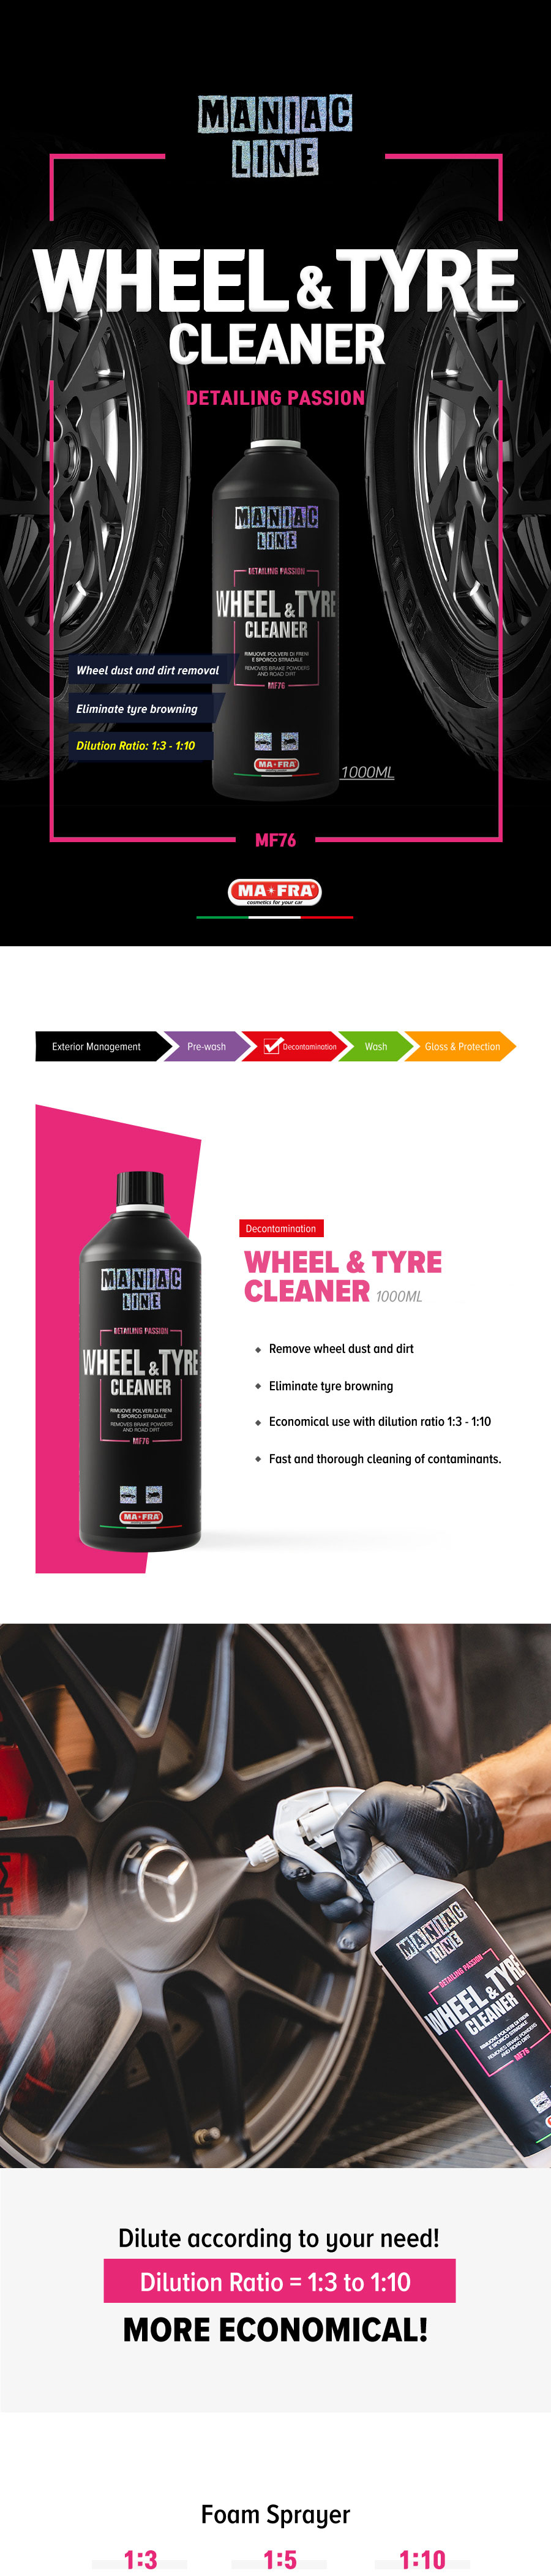 Mafra Maniac Line Wheels and Tyres Cleaner 1L (Xtreme Powerful Effective and pleasant scented 2 in 1 solution to clean tyres and rims cleaner) - Maniac Line Official Store Singapore